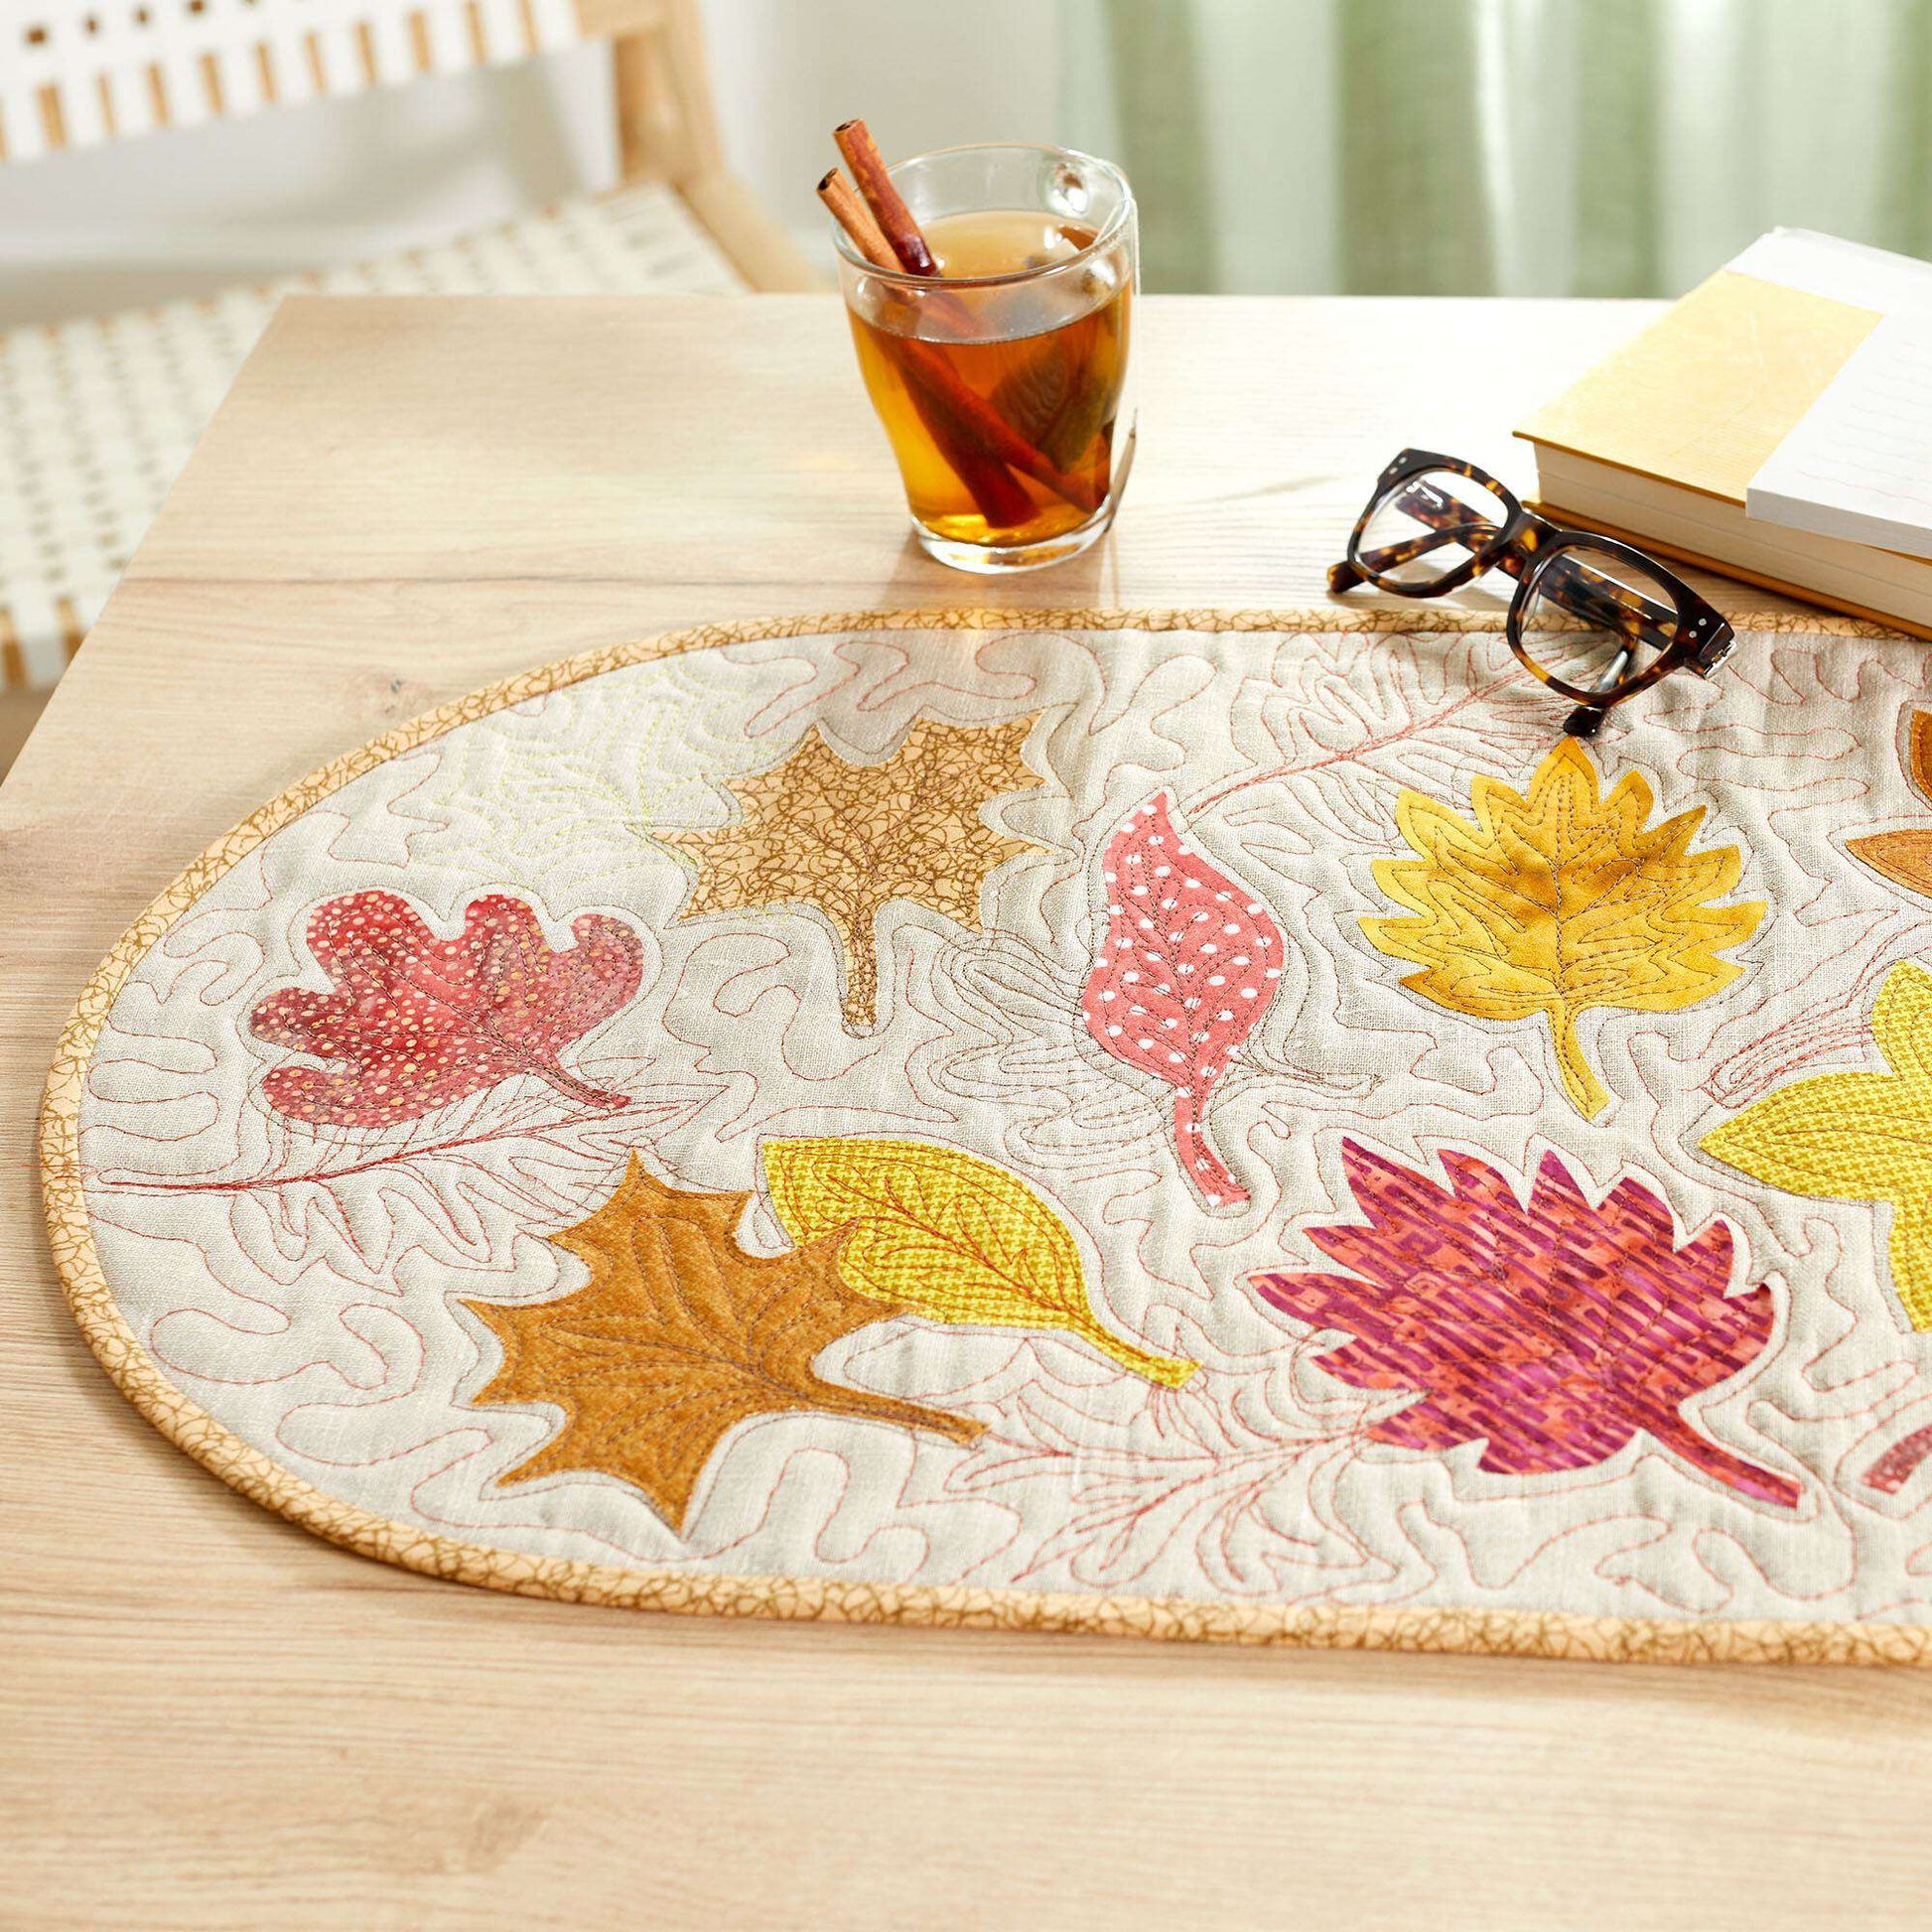 Free Coats & Clark Autumn Leaf Table Runner Sewing Pattern